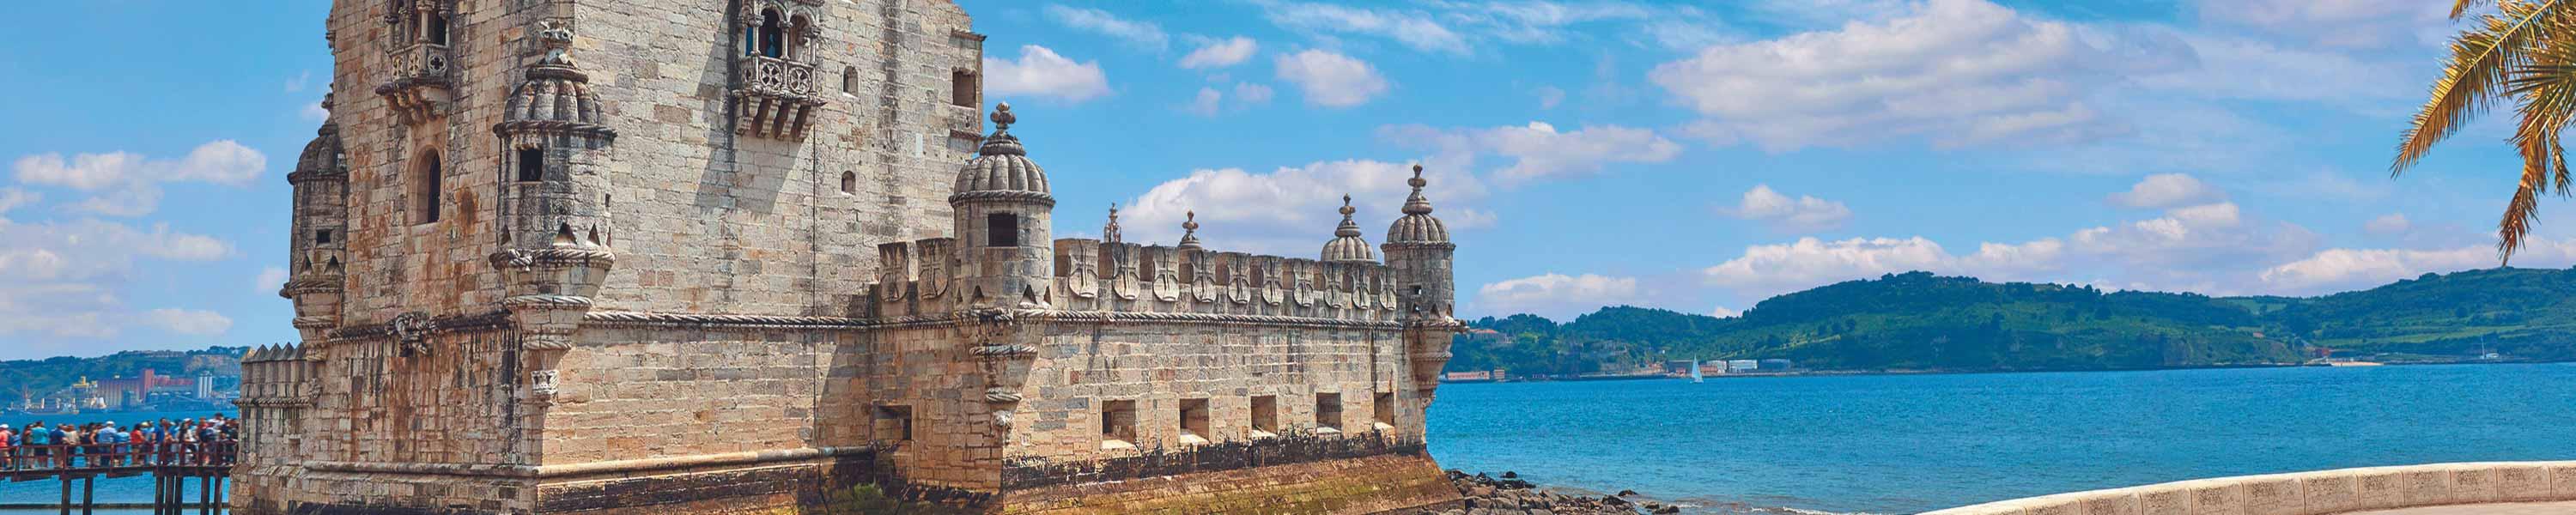 Tomar Convent in Portugal with Waterfront Background